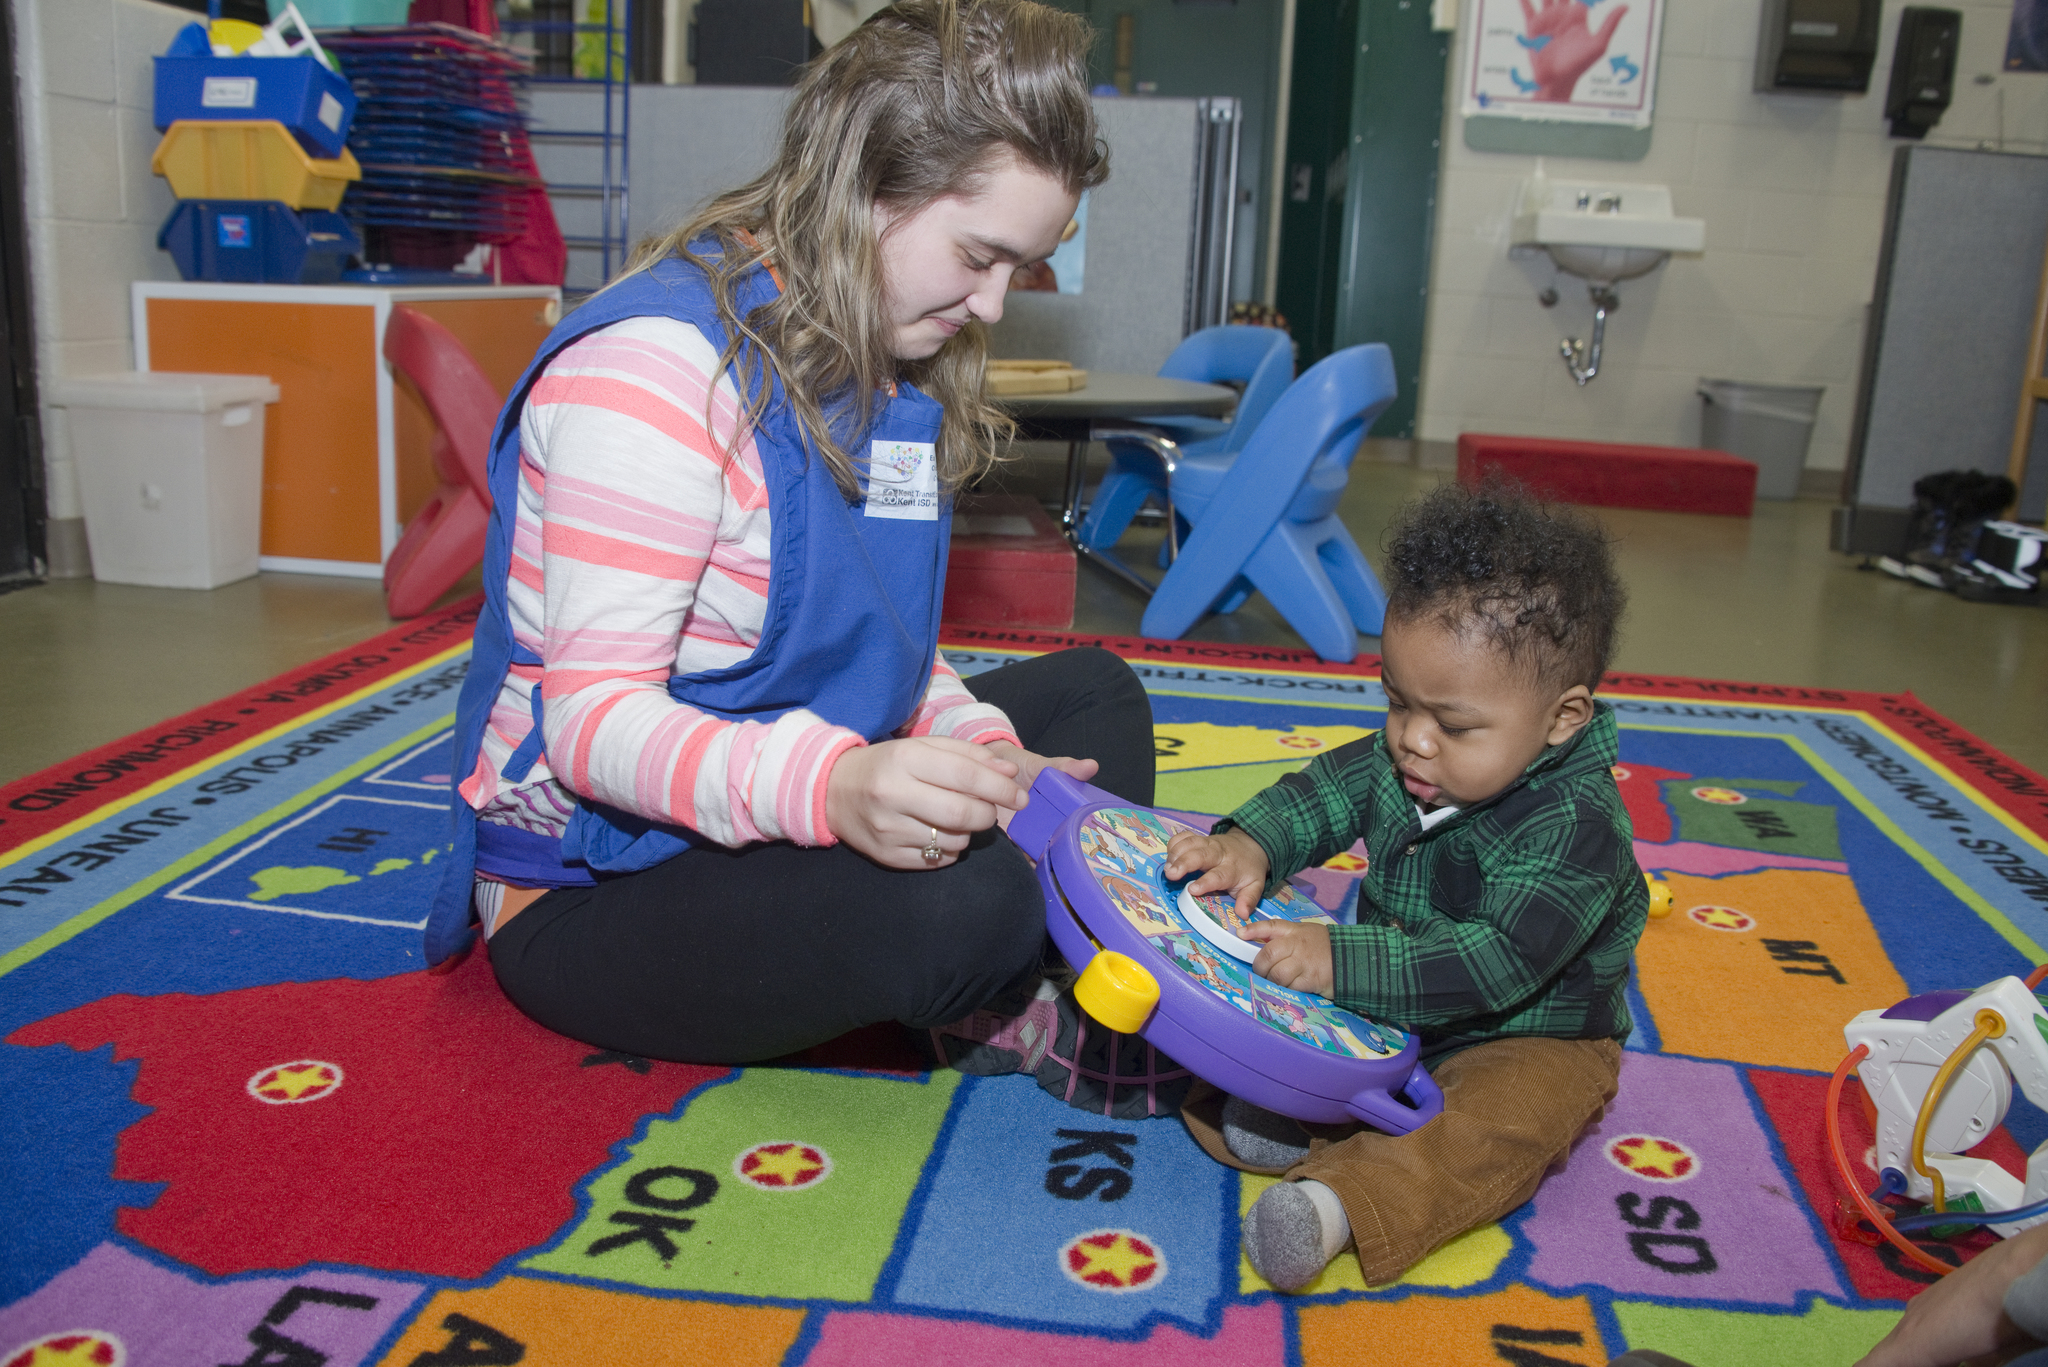 KTC Child & Family Care student working with child